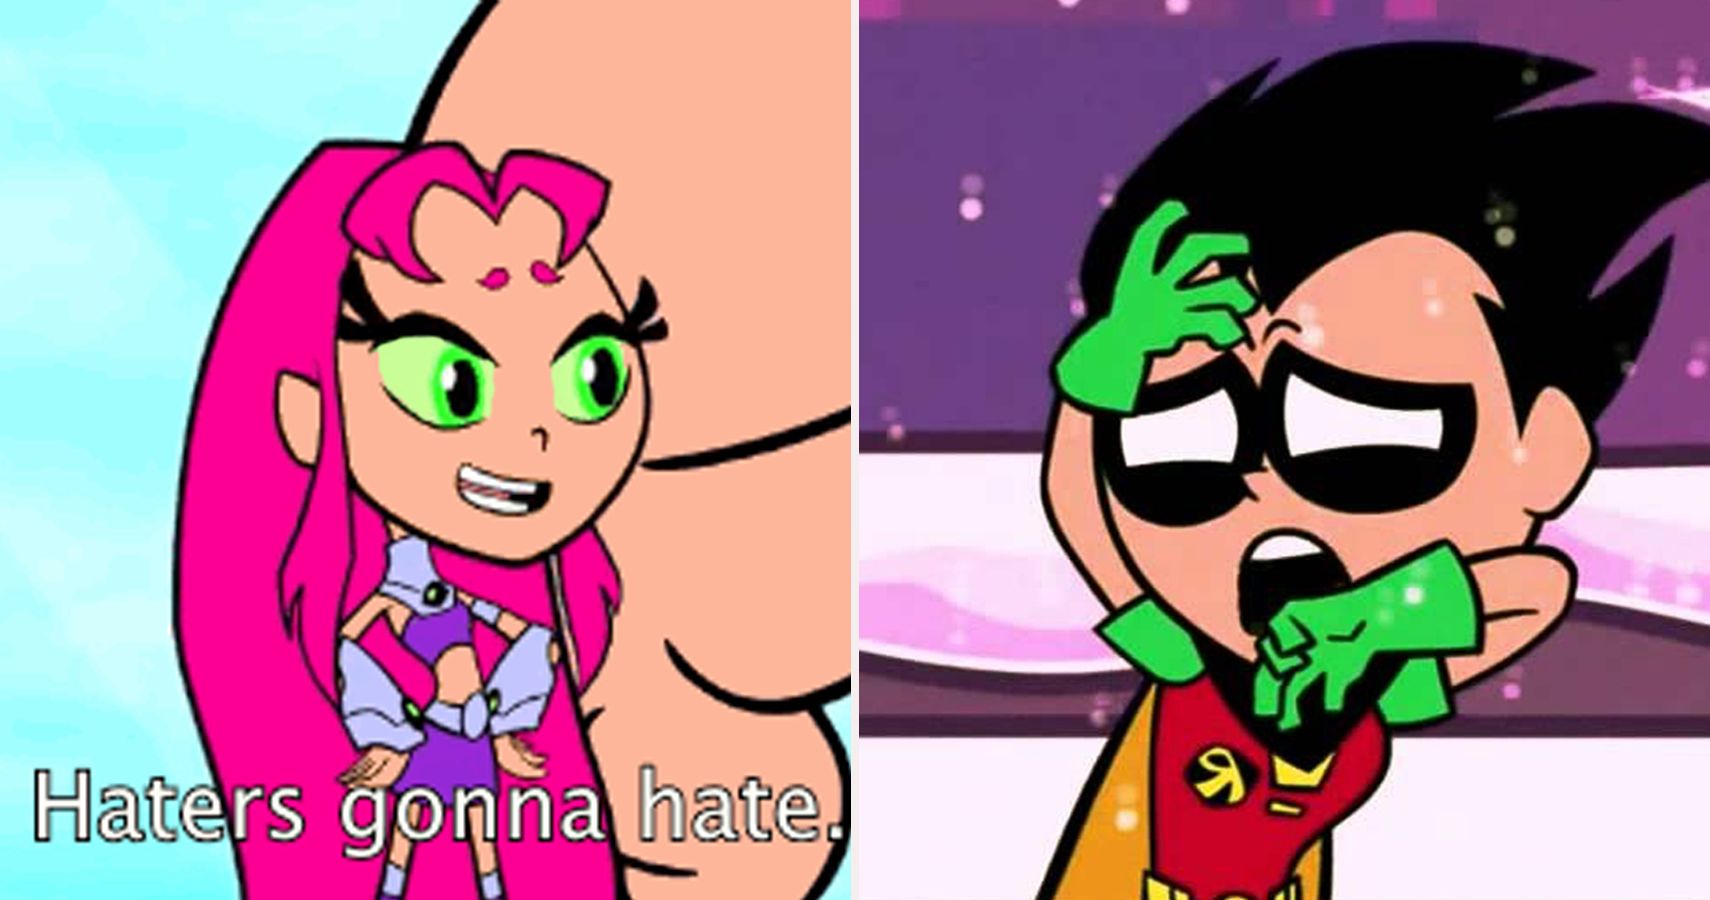 thoughts on Control Freak? : r/teentitans